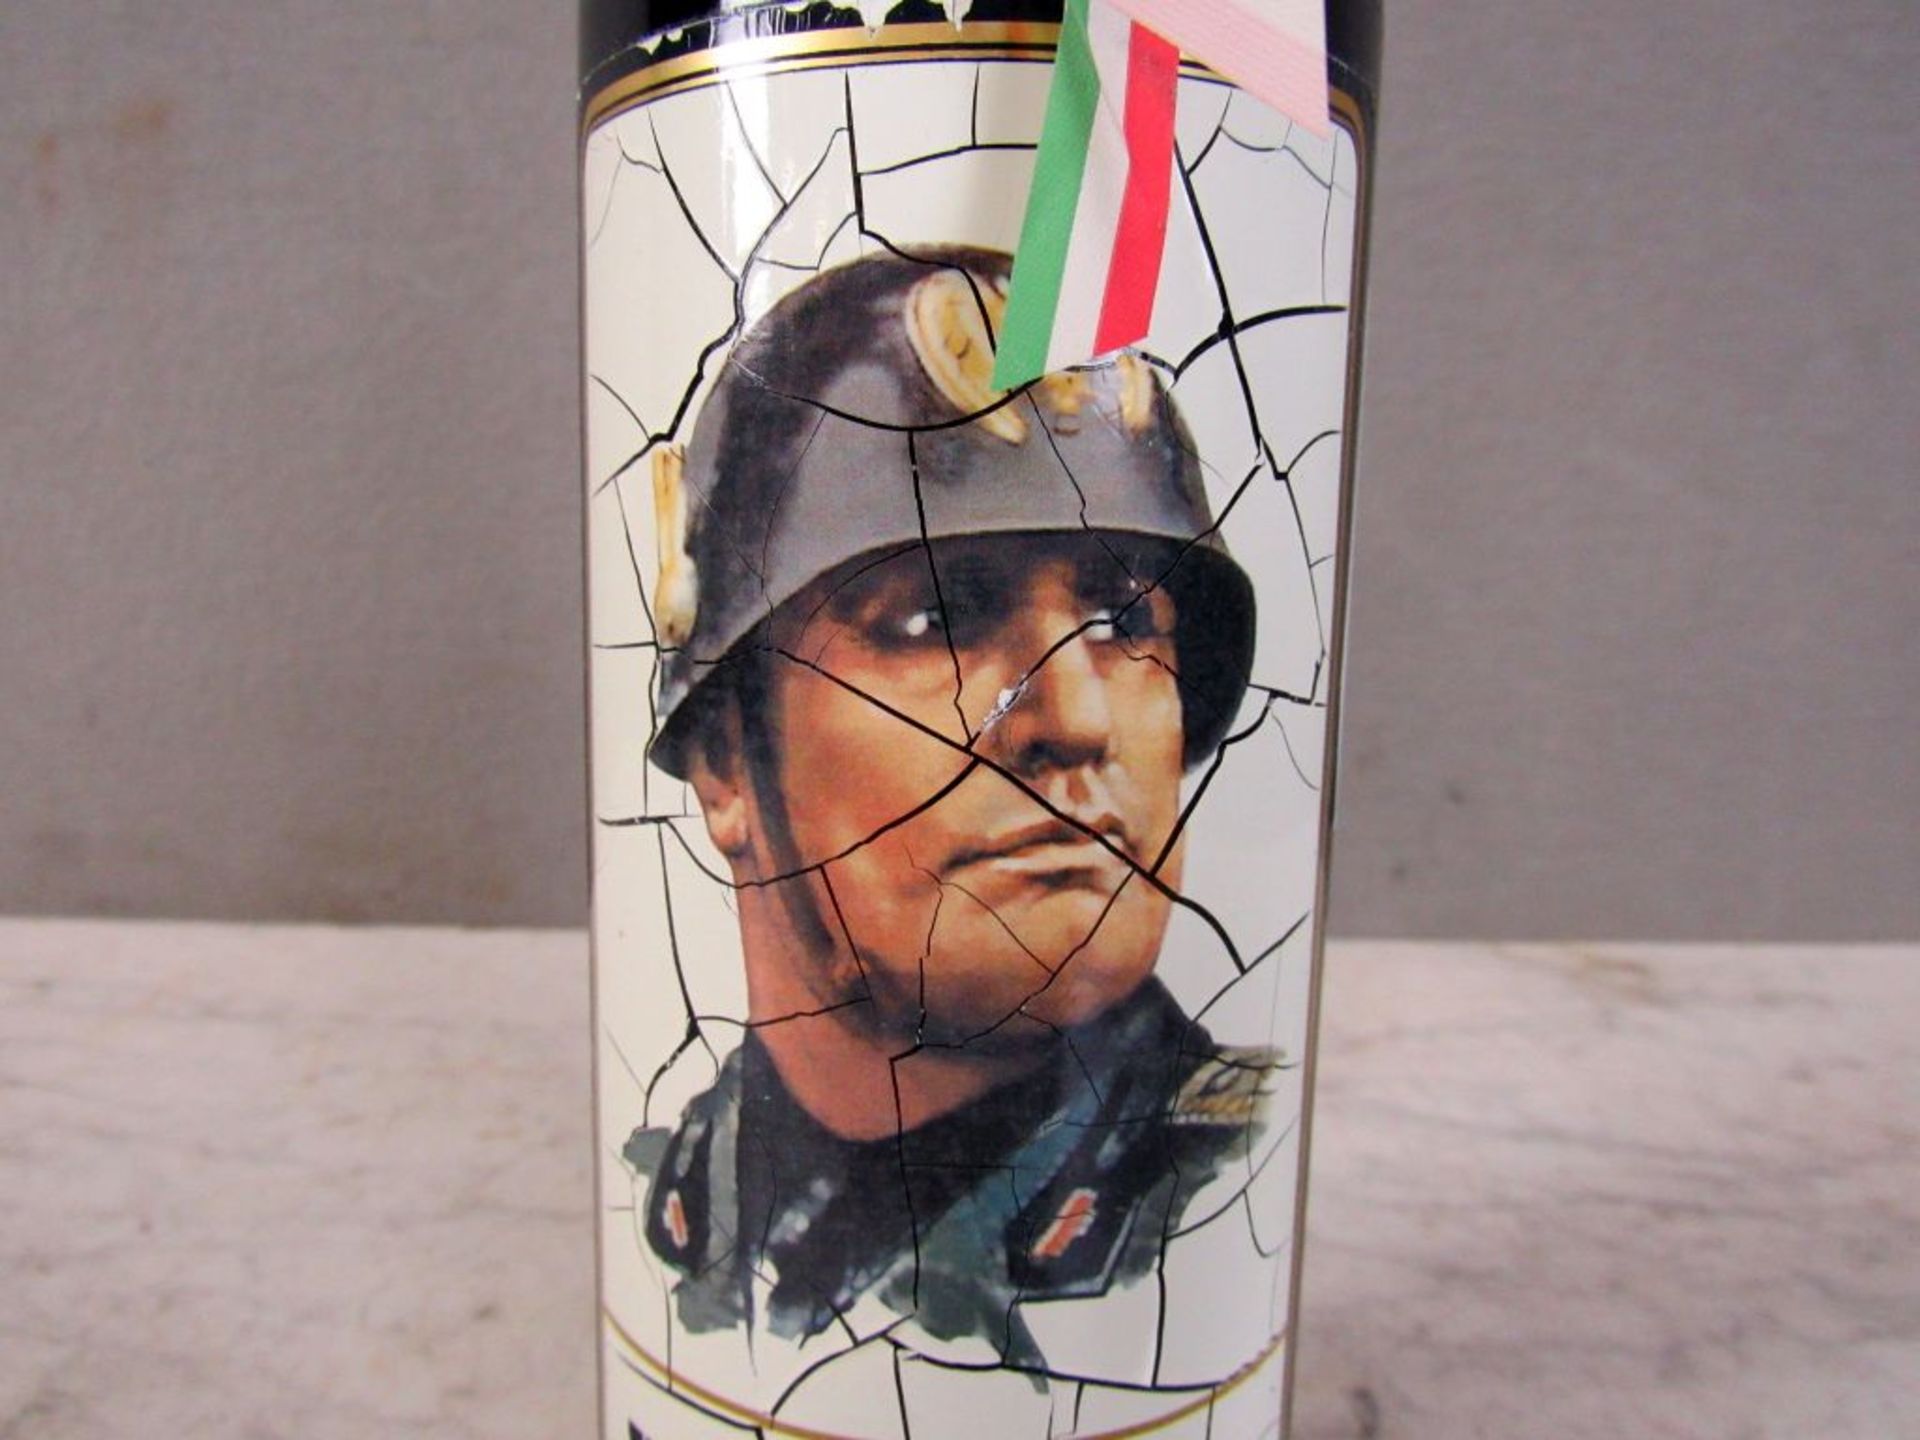 Wein Mussolini - Image 3 of 6